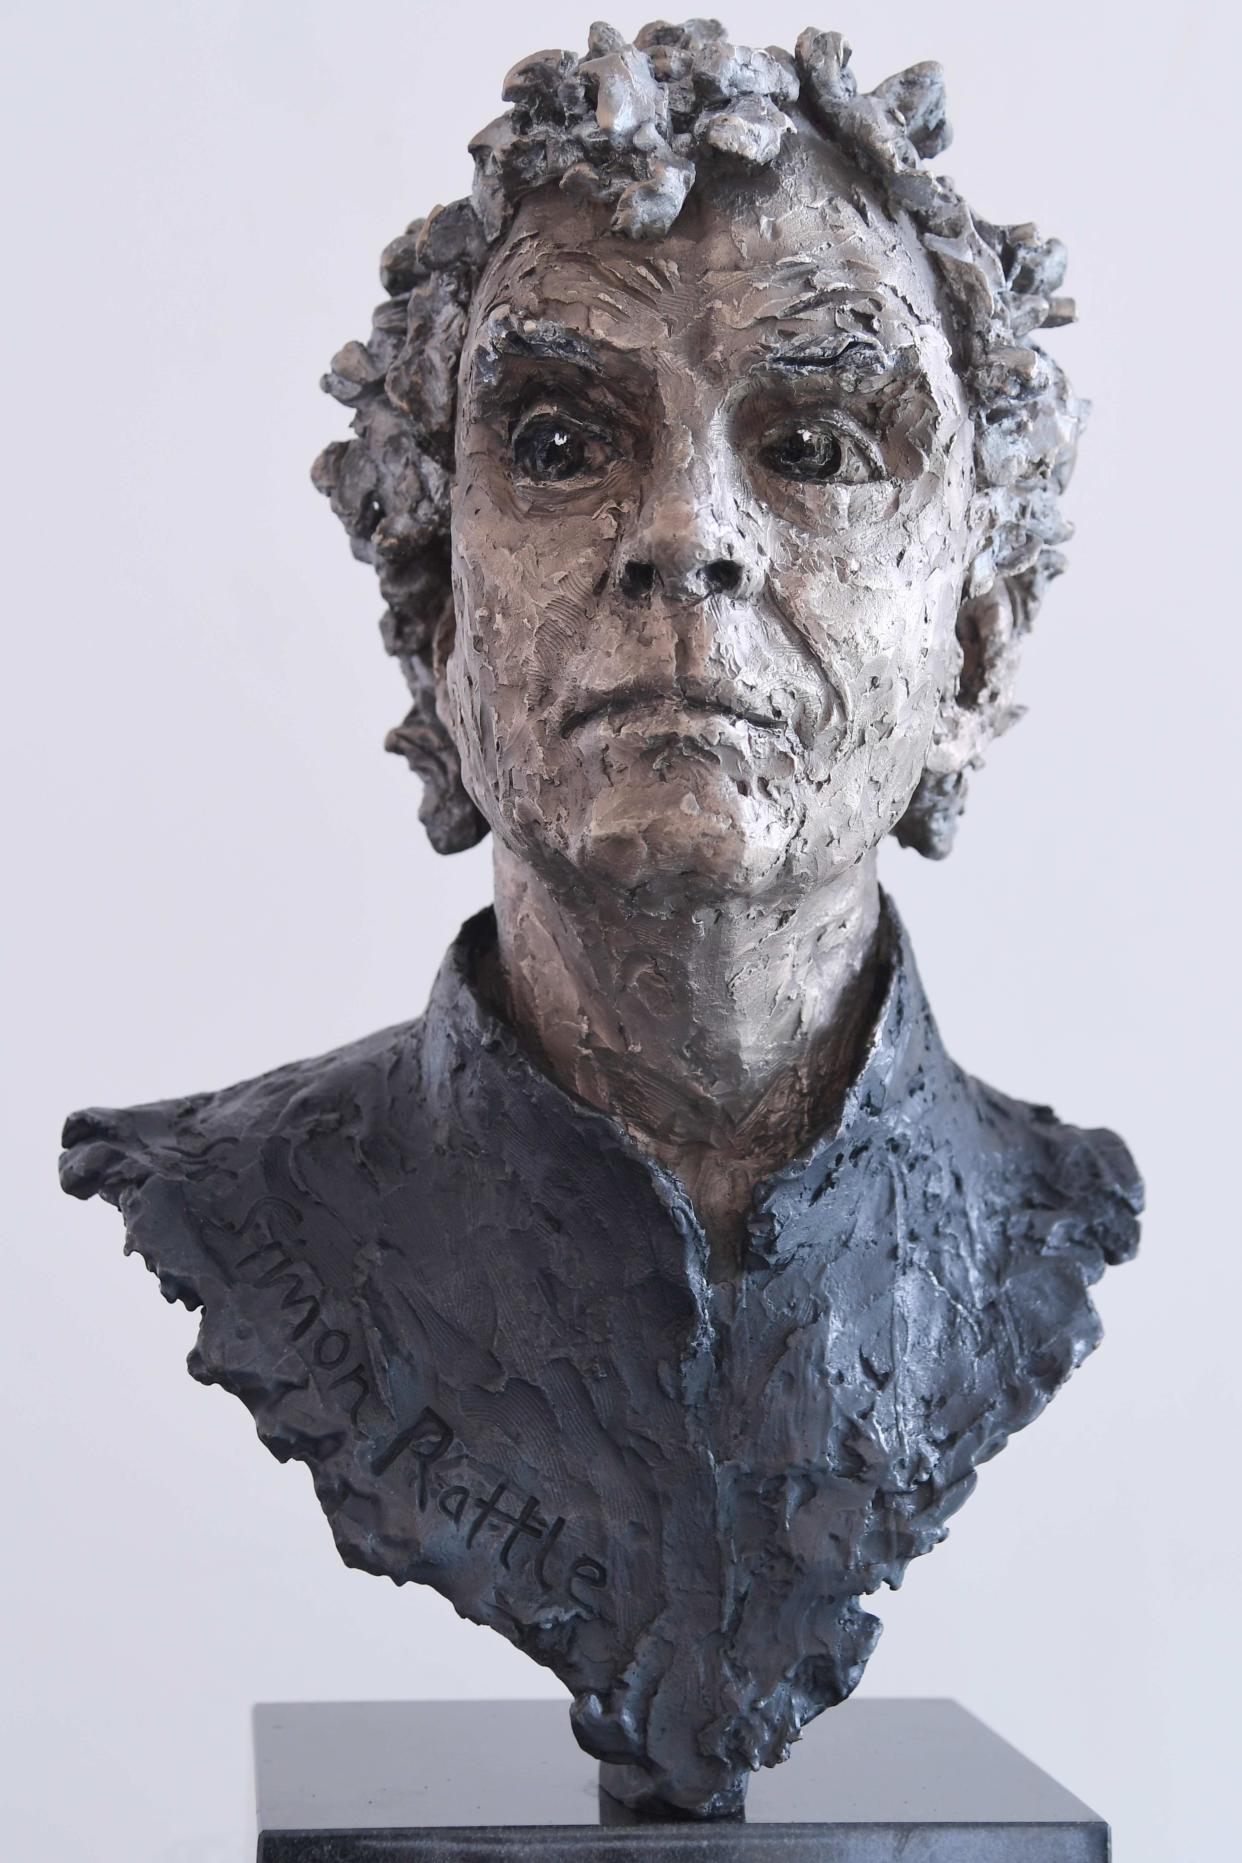 The sculpture will be unveiled on June 15 before Sir Simon conducts his final concert as the London Symphony Orchestra’s (LSO) music director (Sophie Dunne/PA)